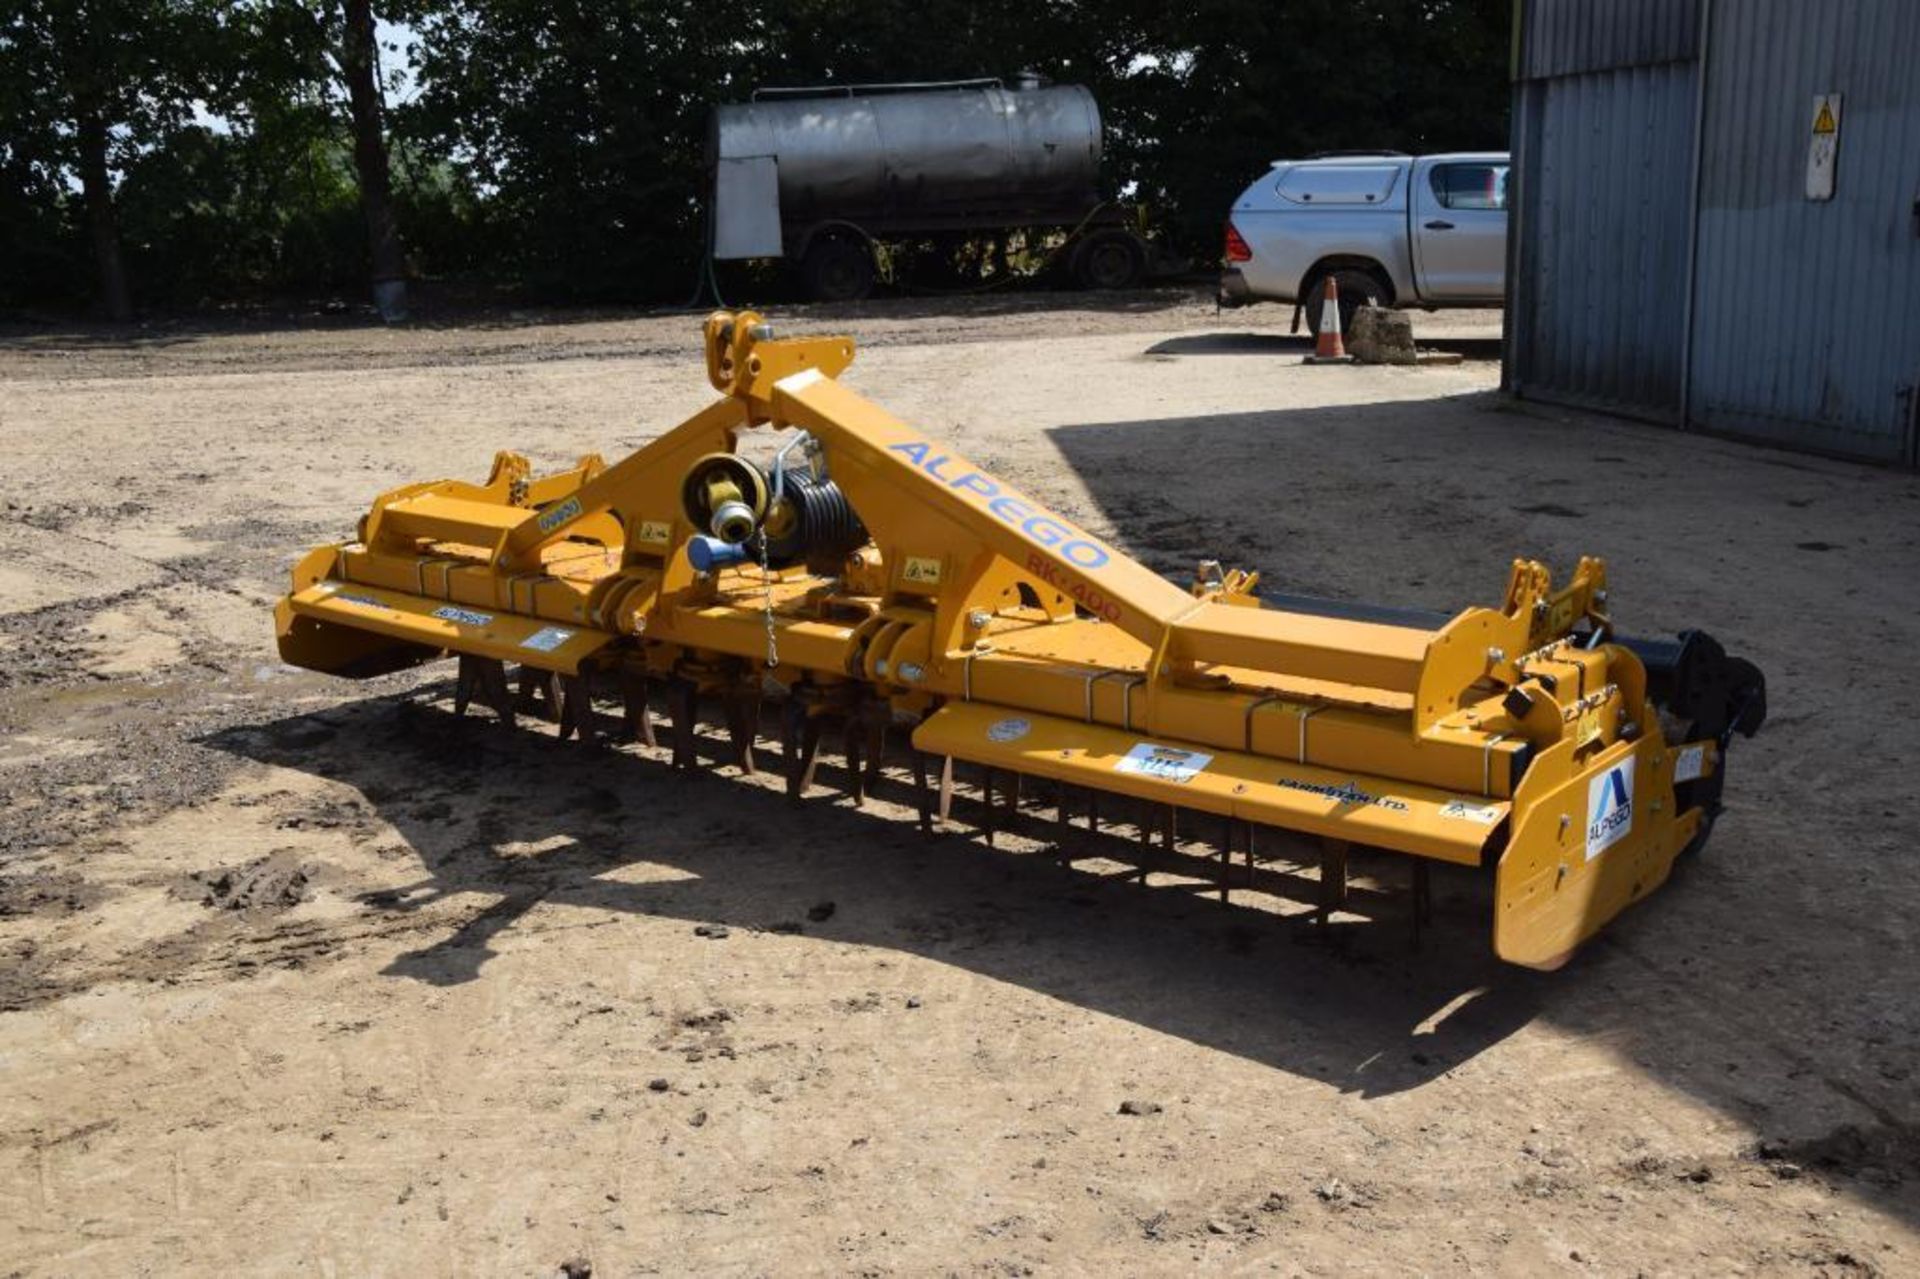 2019 Alpego RK400 4m power harrow with rear crumbler. Serial No: 000047997.  Manual in the office. - Image 6 of 16